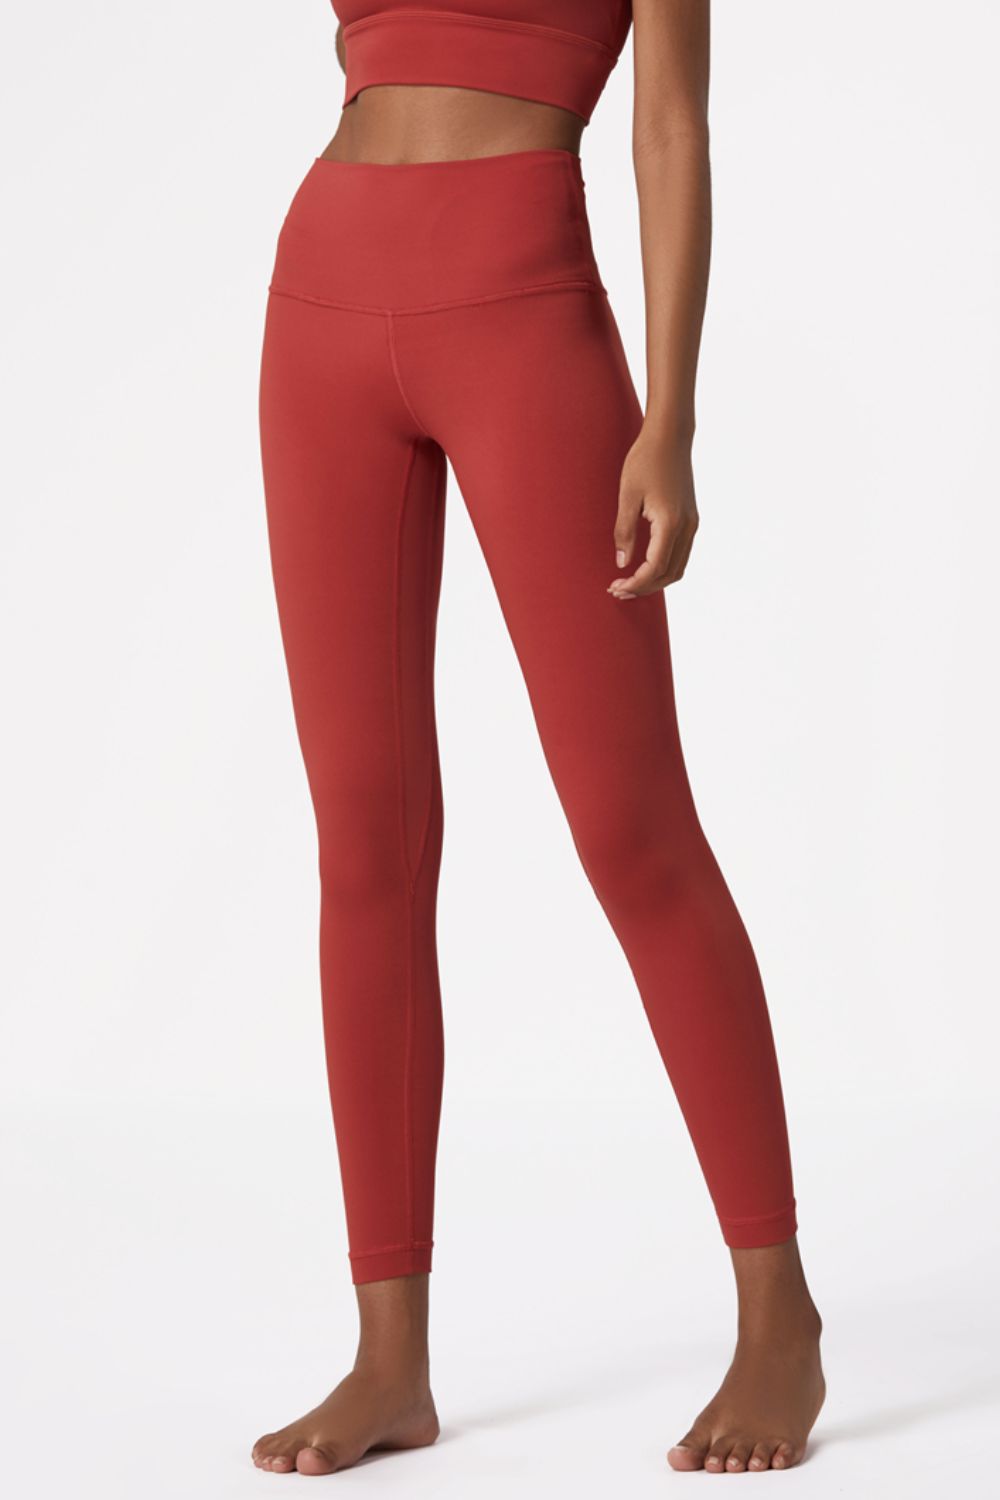 Take A Hike Yoga Leggings - Red / 4 - Women’s Clothing & Accessories - Activewear - 1 - 2024